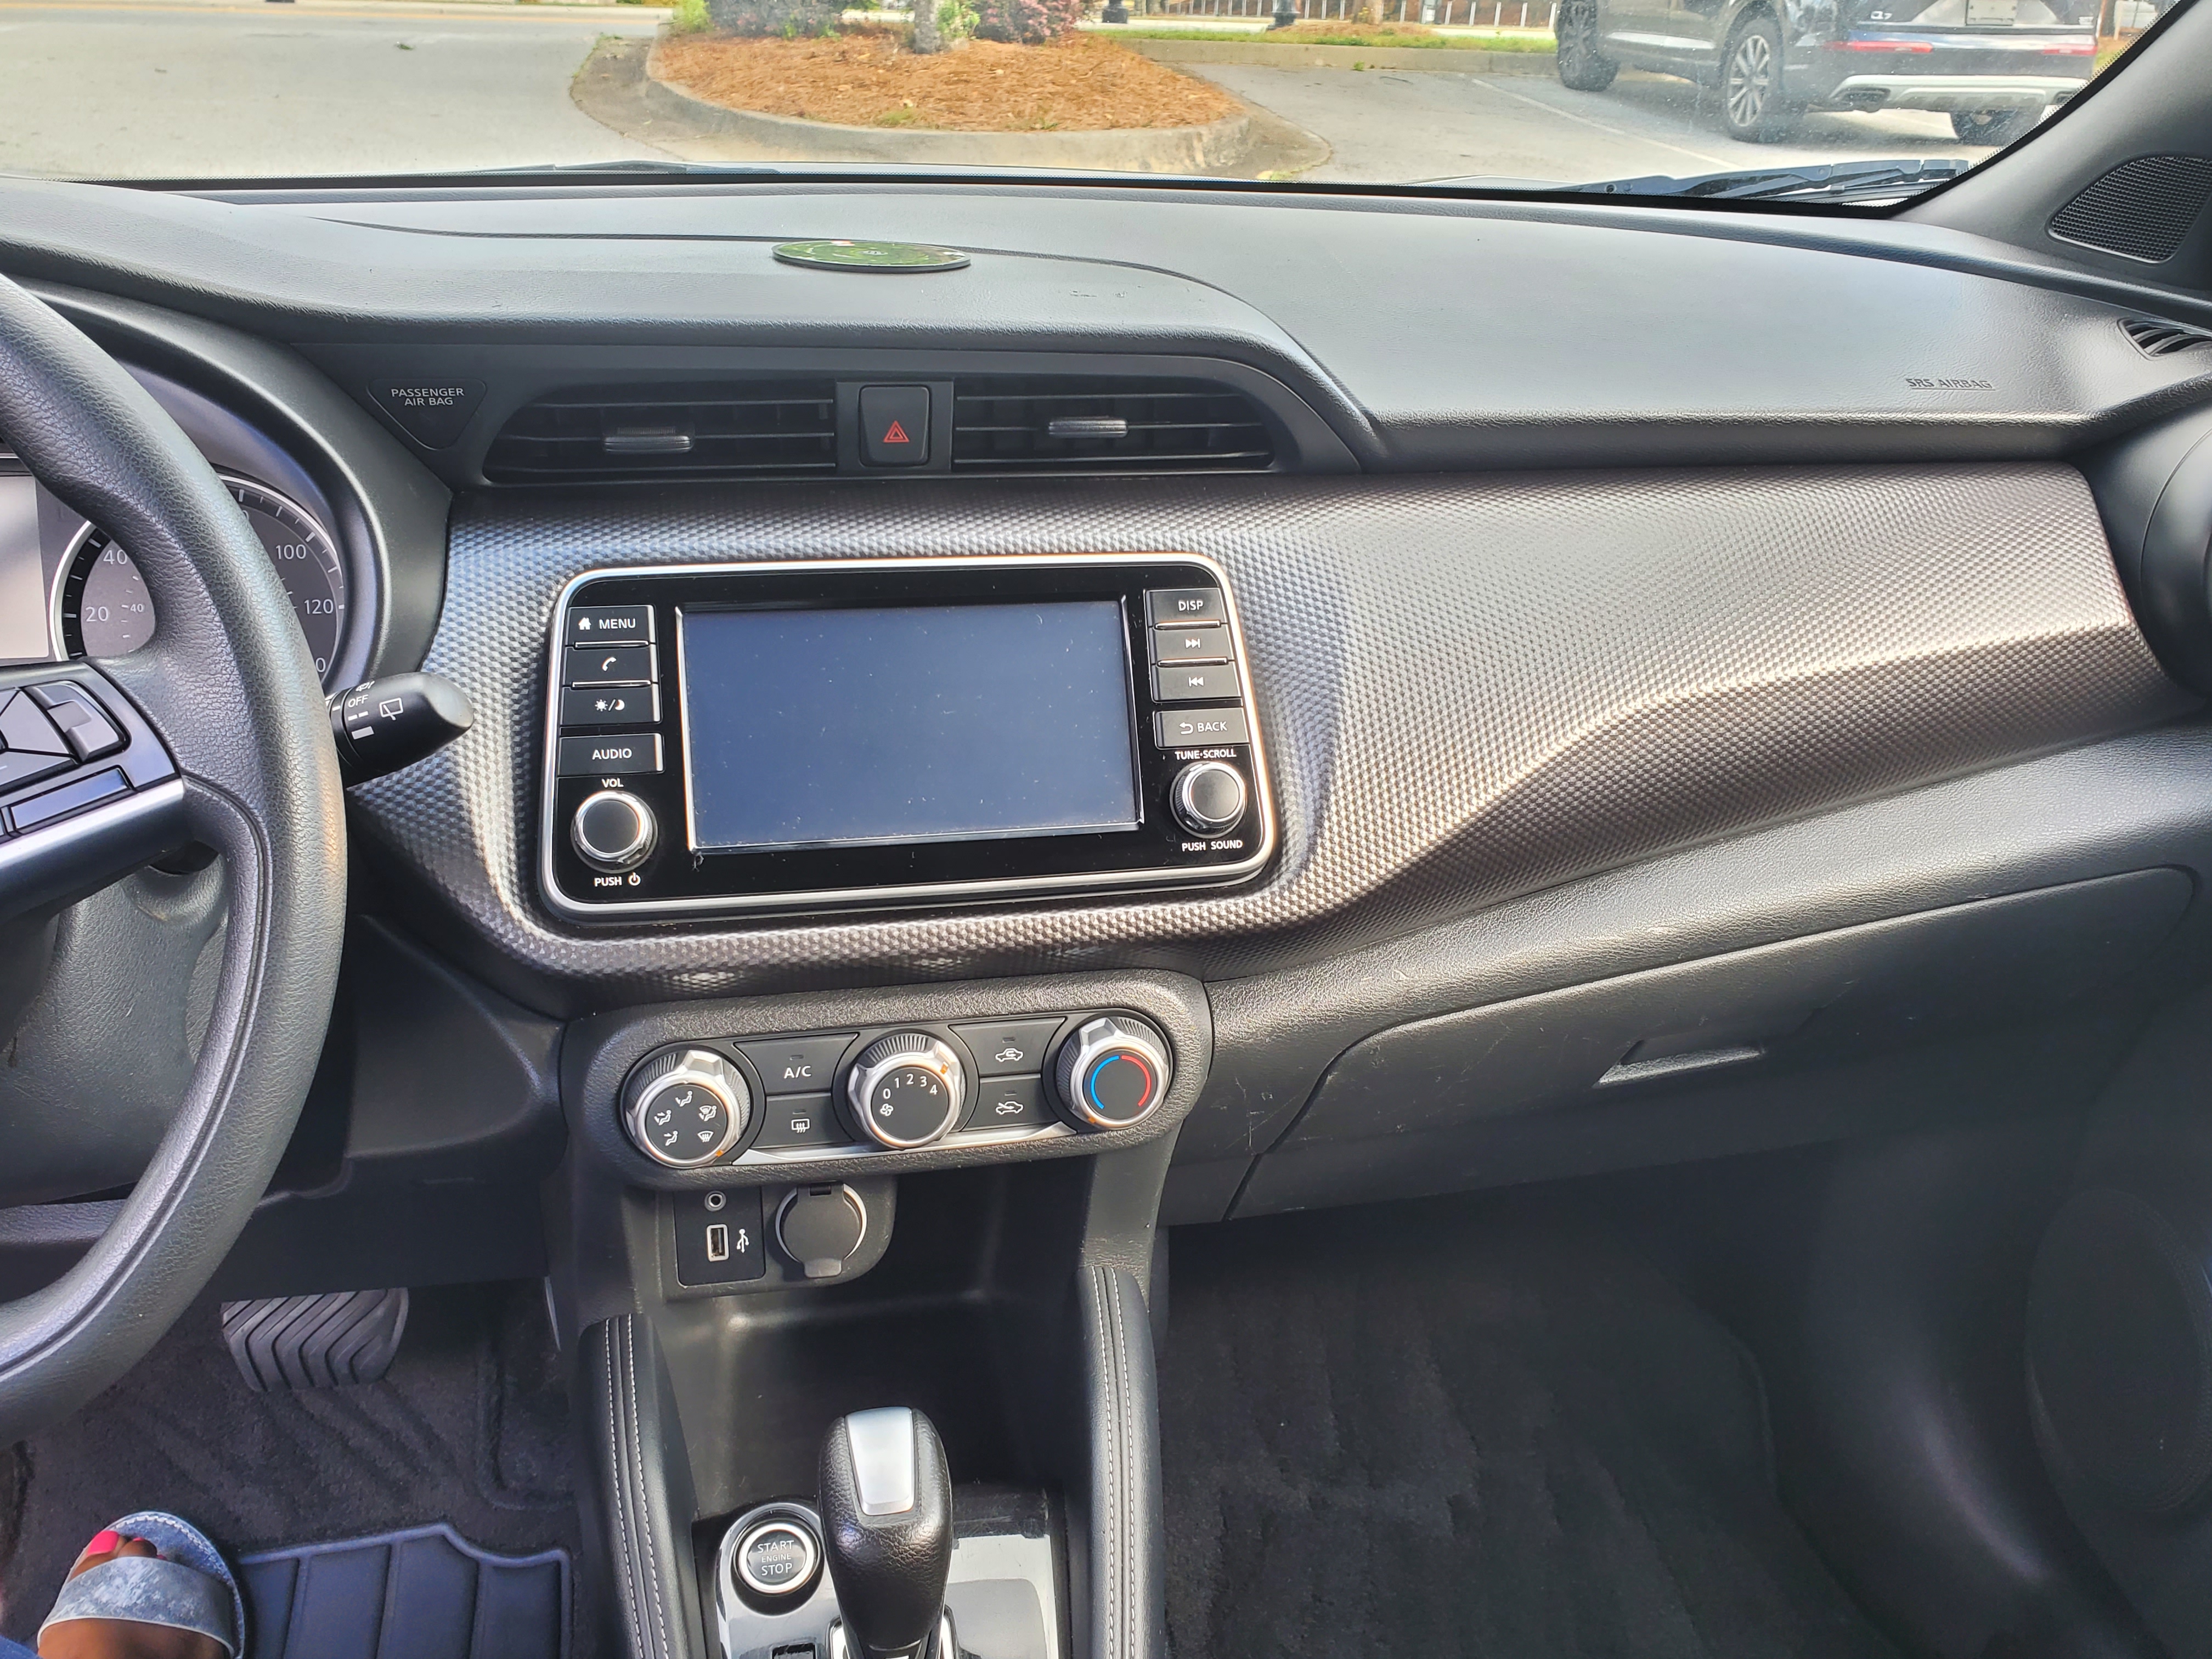 Nissan Console